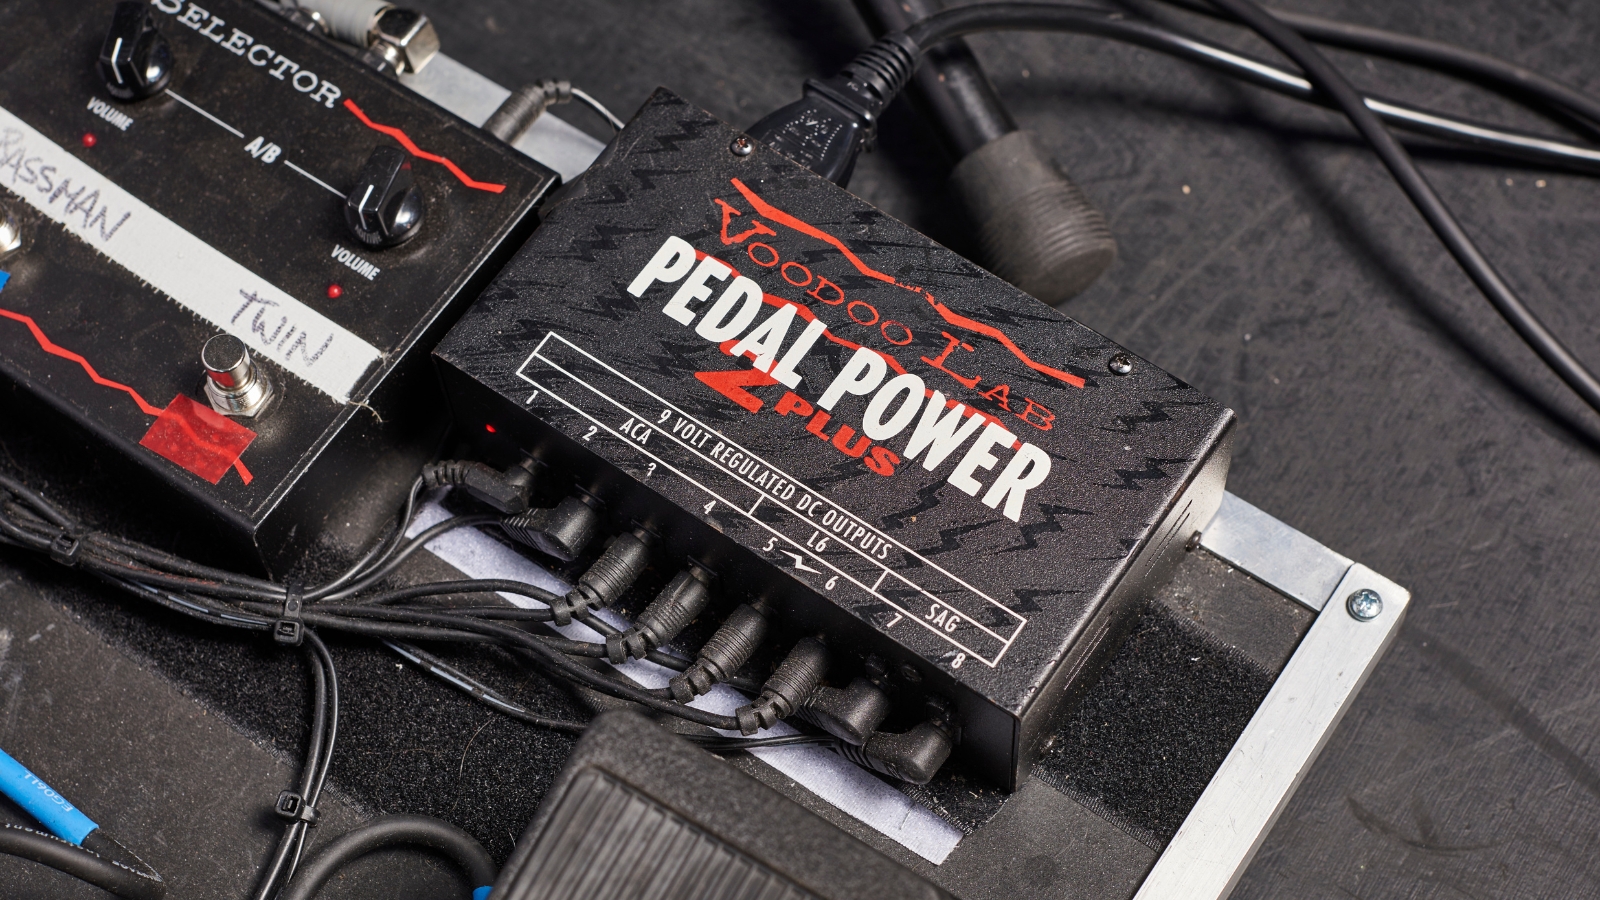 Fender Engine Room LVL 8 Power Supply - Unboxing 